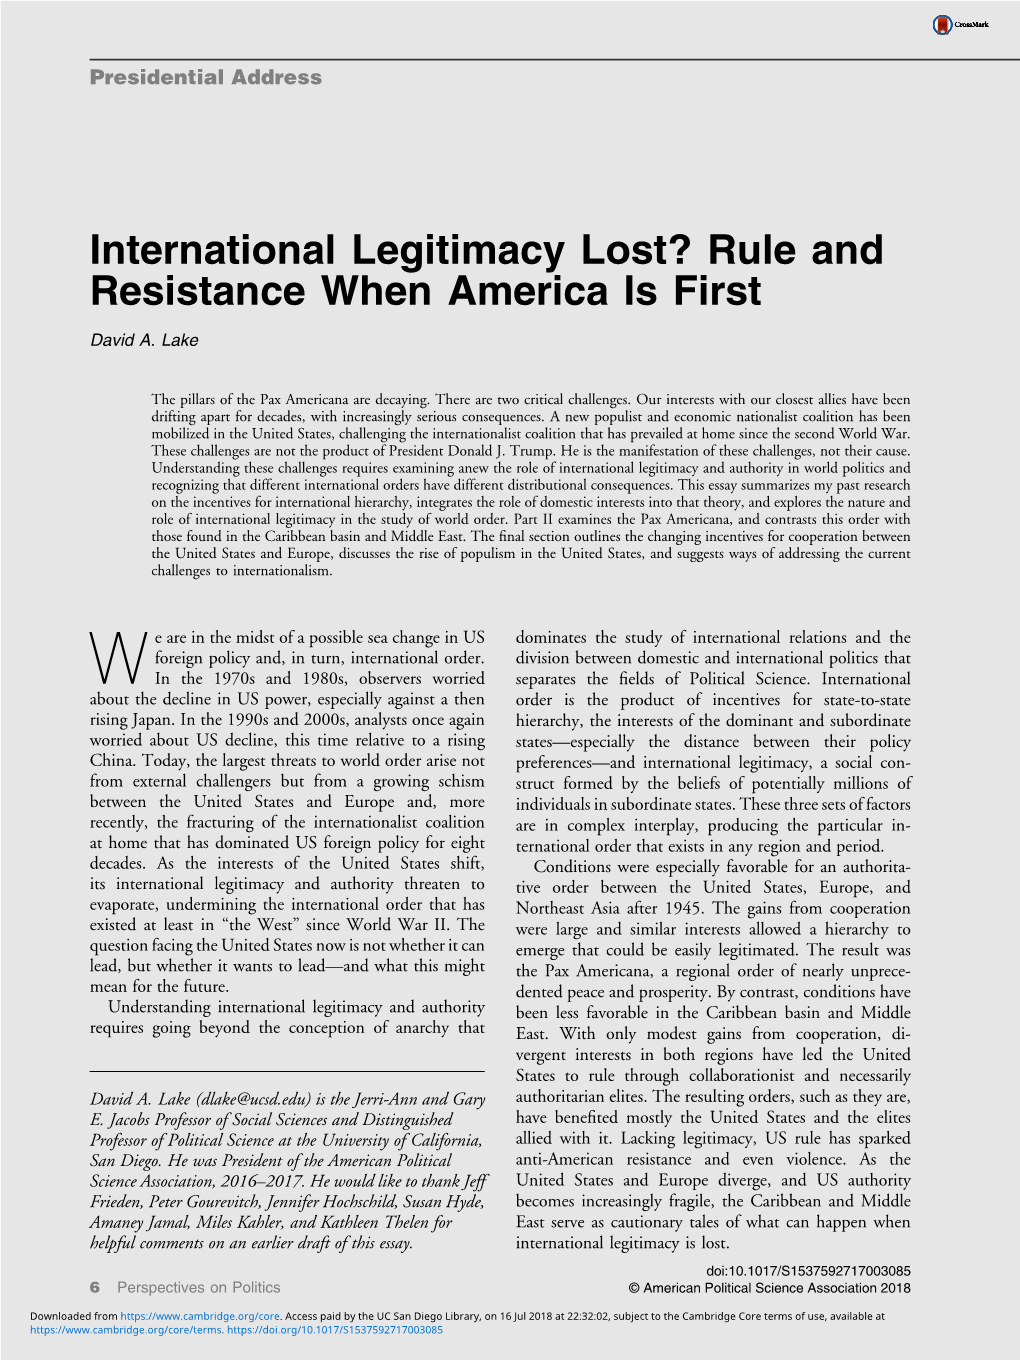 International Legitimacy Lost? Rule and Resistance When America Is First David A